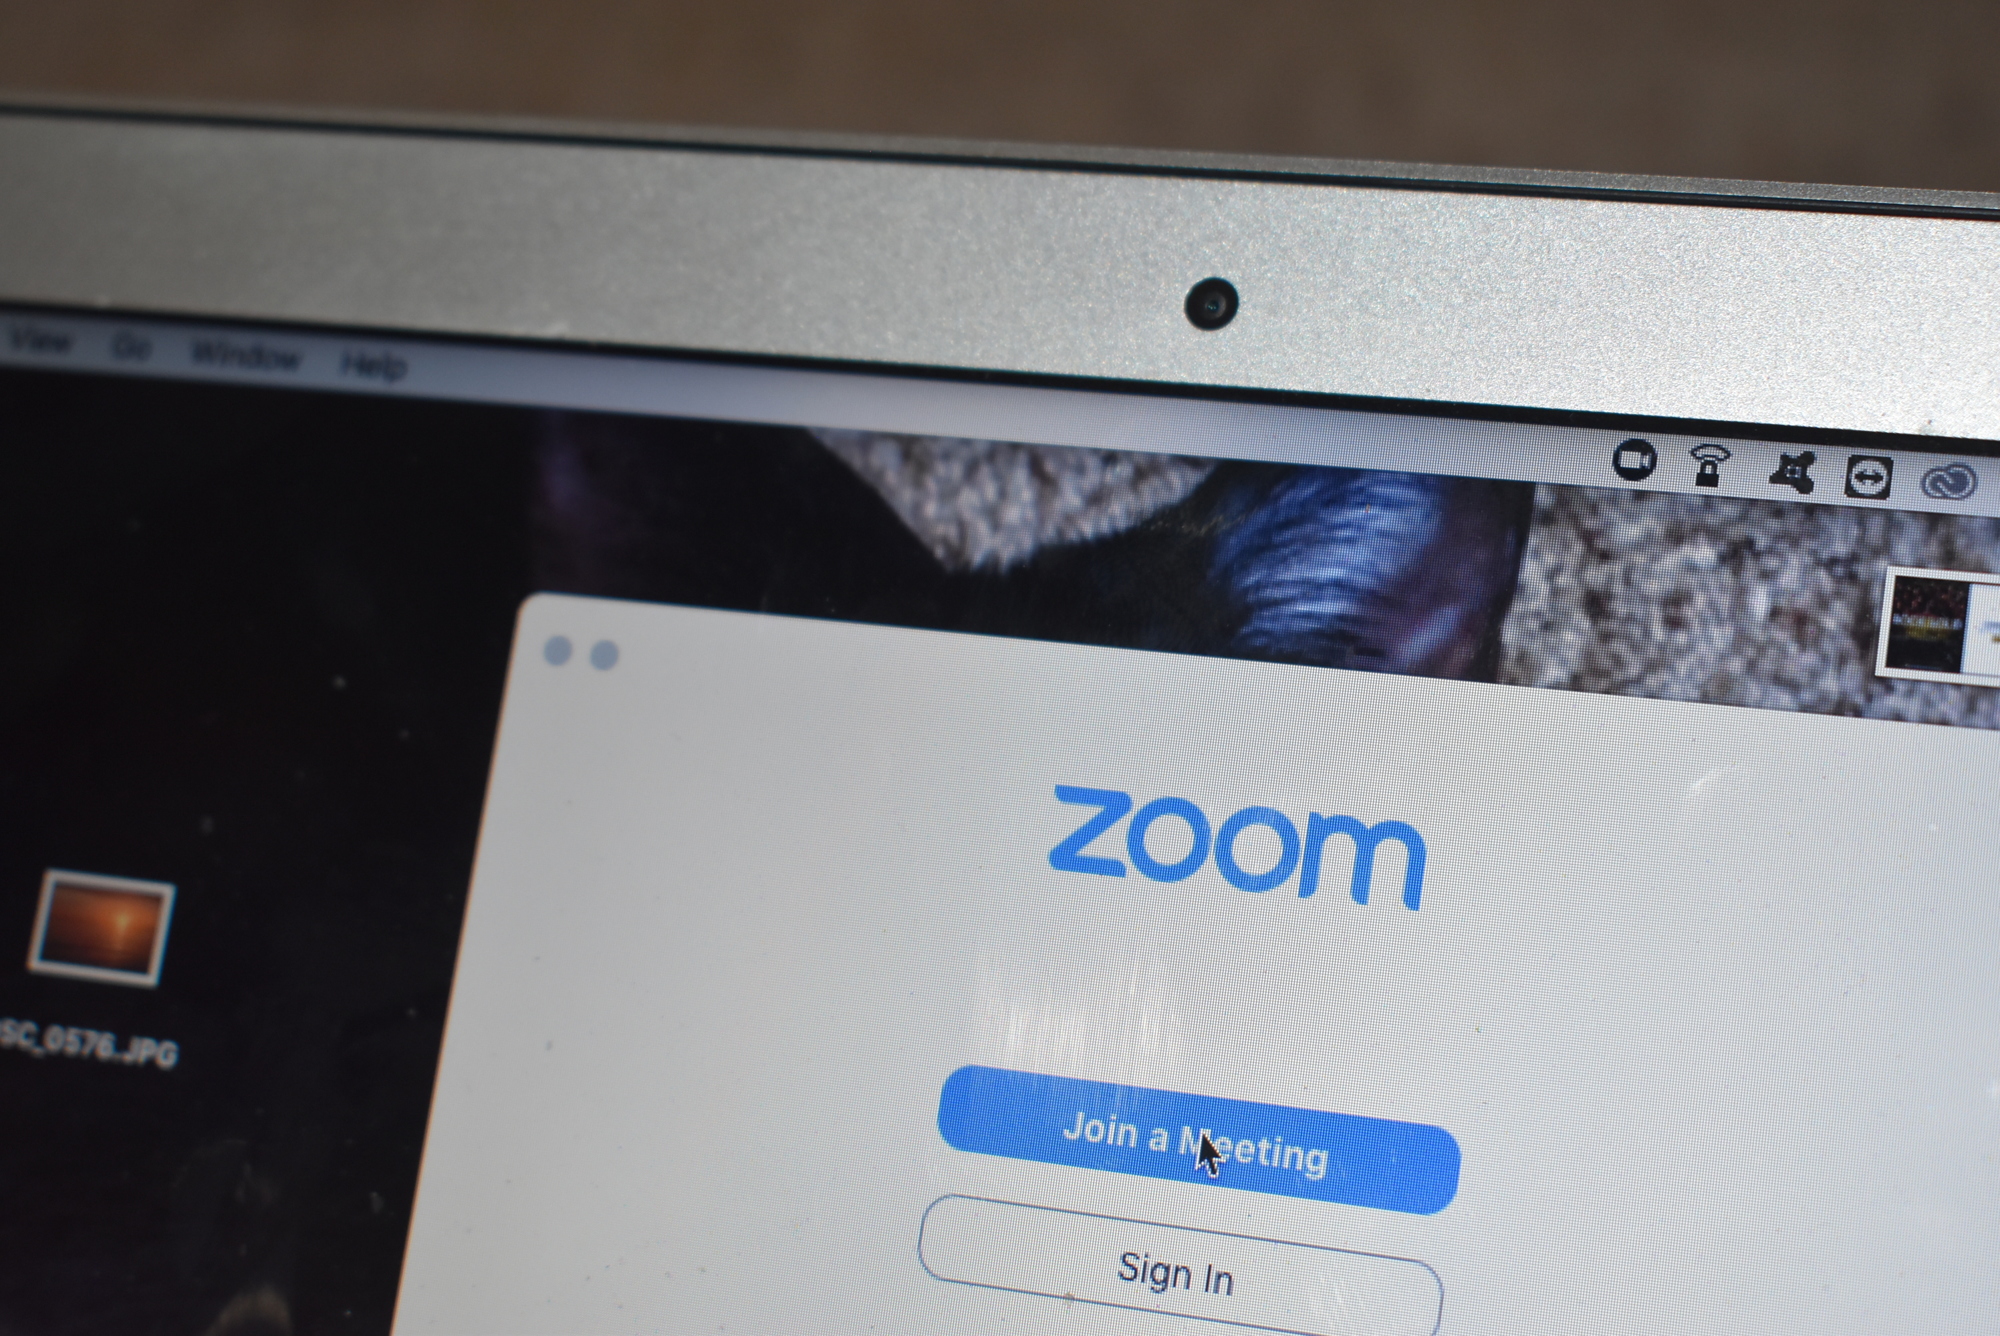 No longer just for conference calls, families are taking advantage of Zoom to virtually hang out with each other.